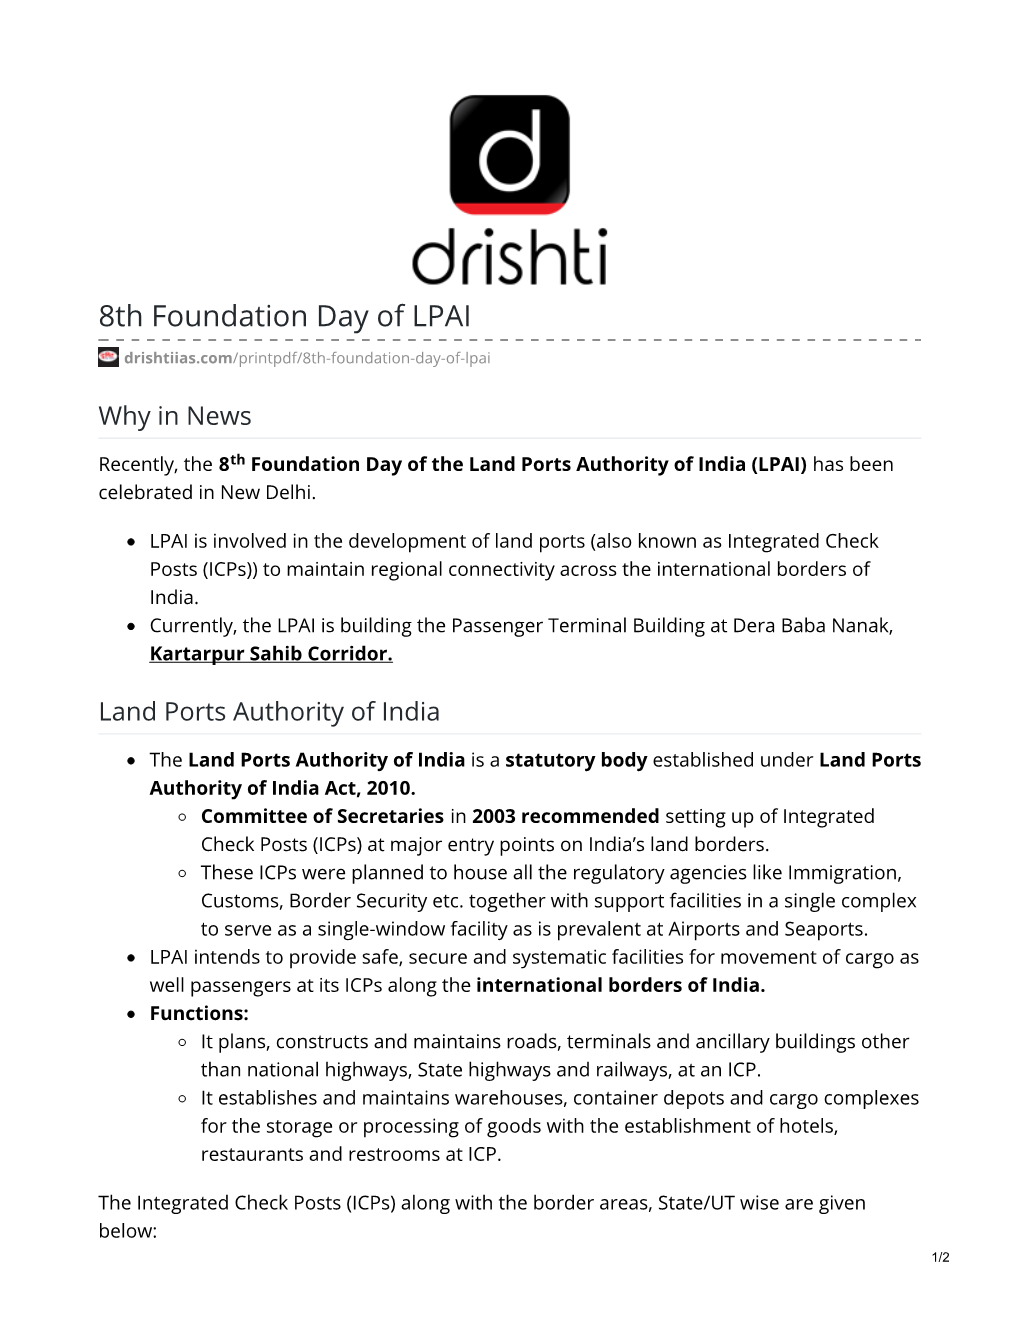 8Th Foundation Day of LPAI